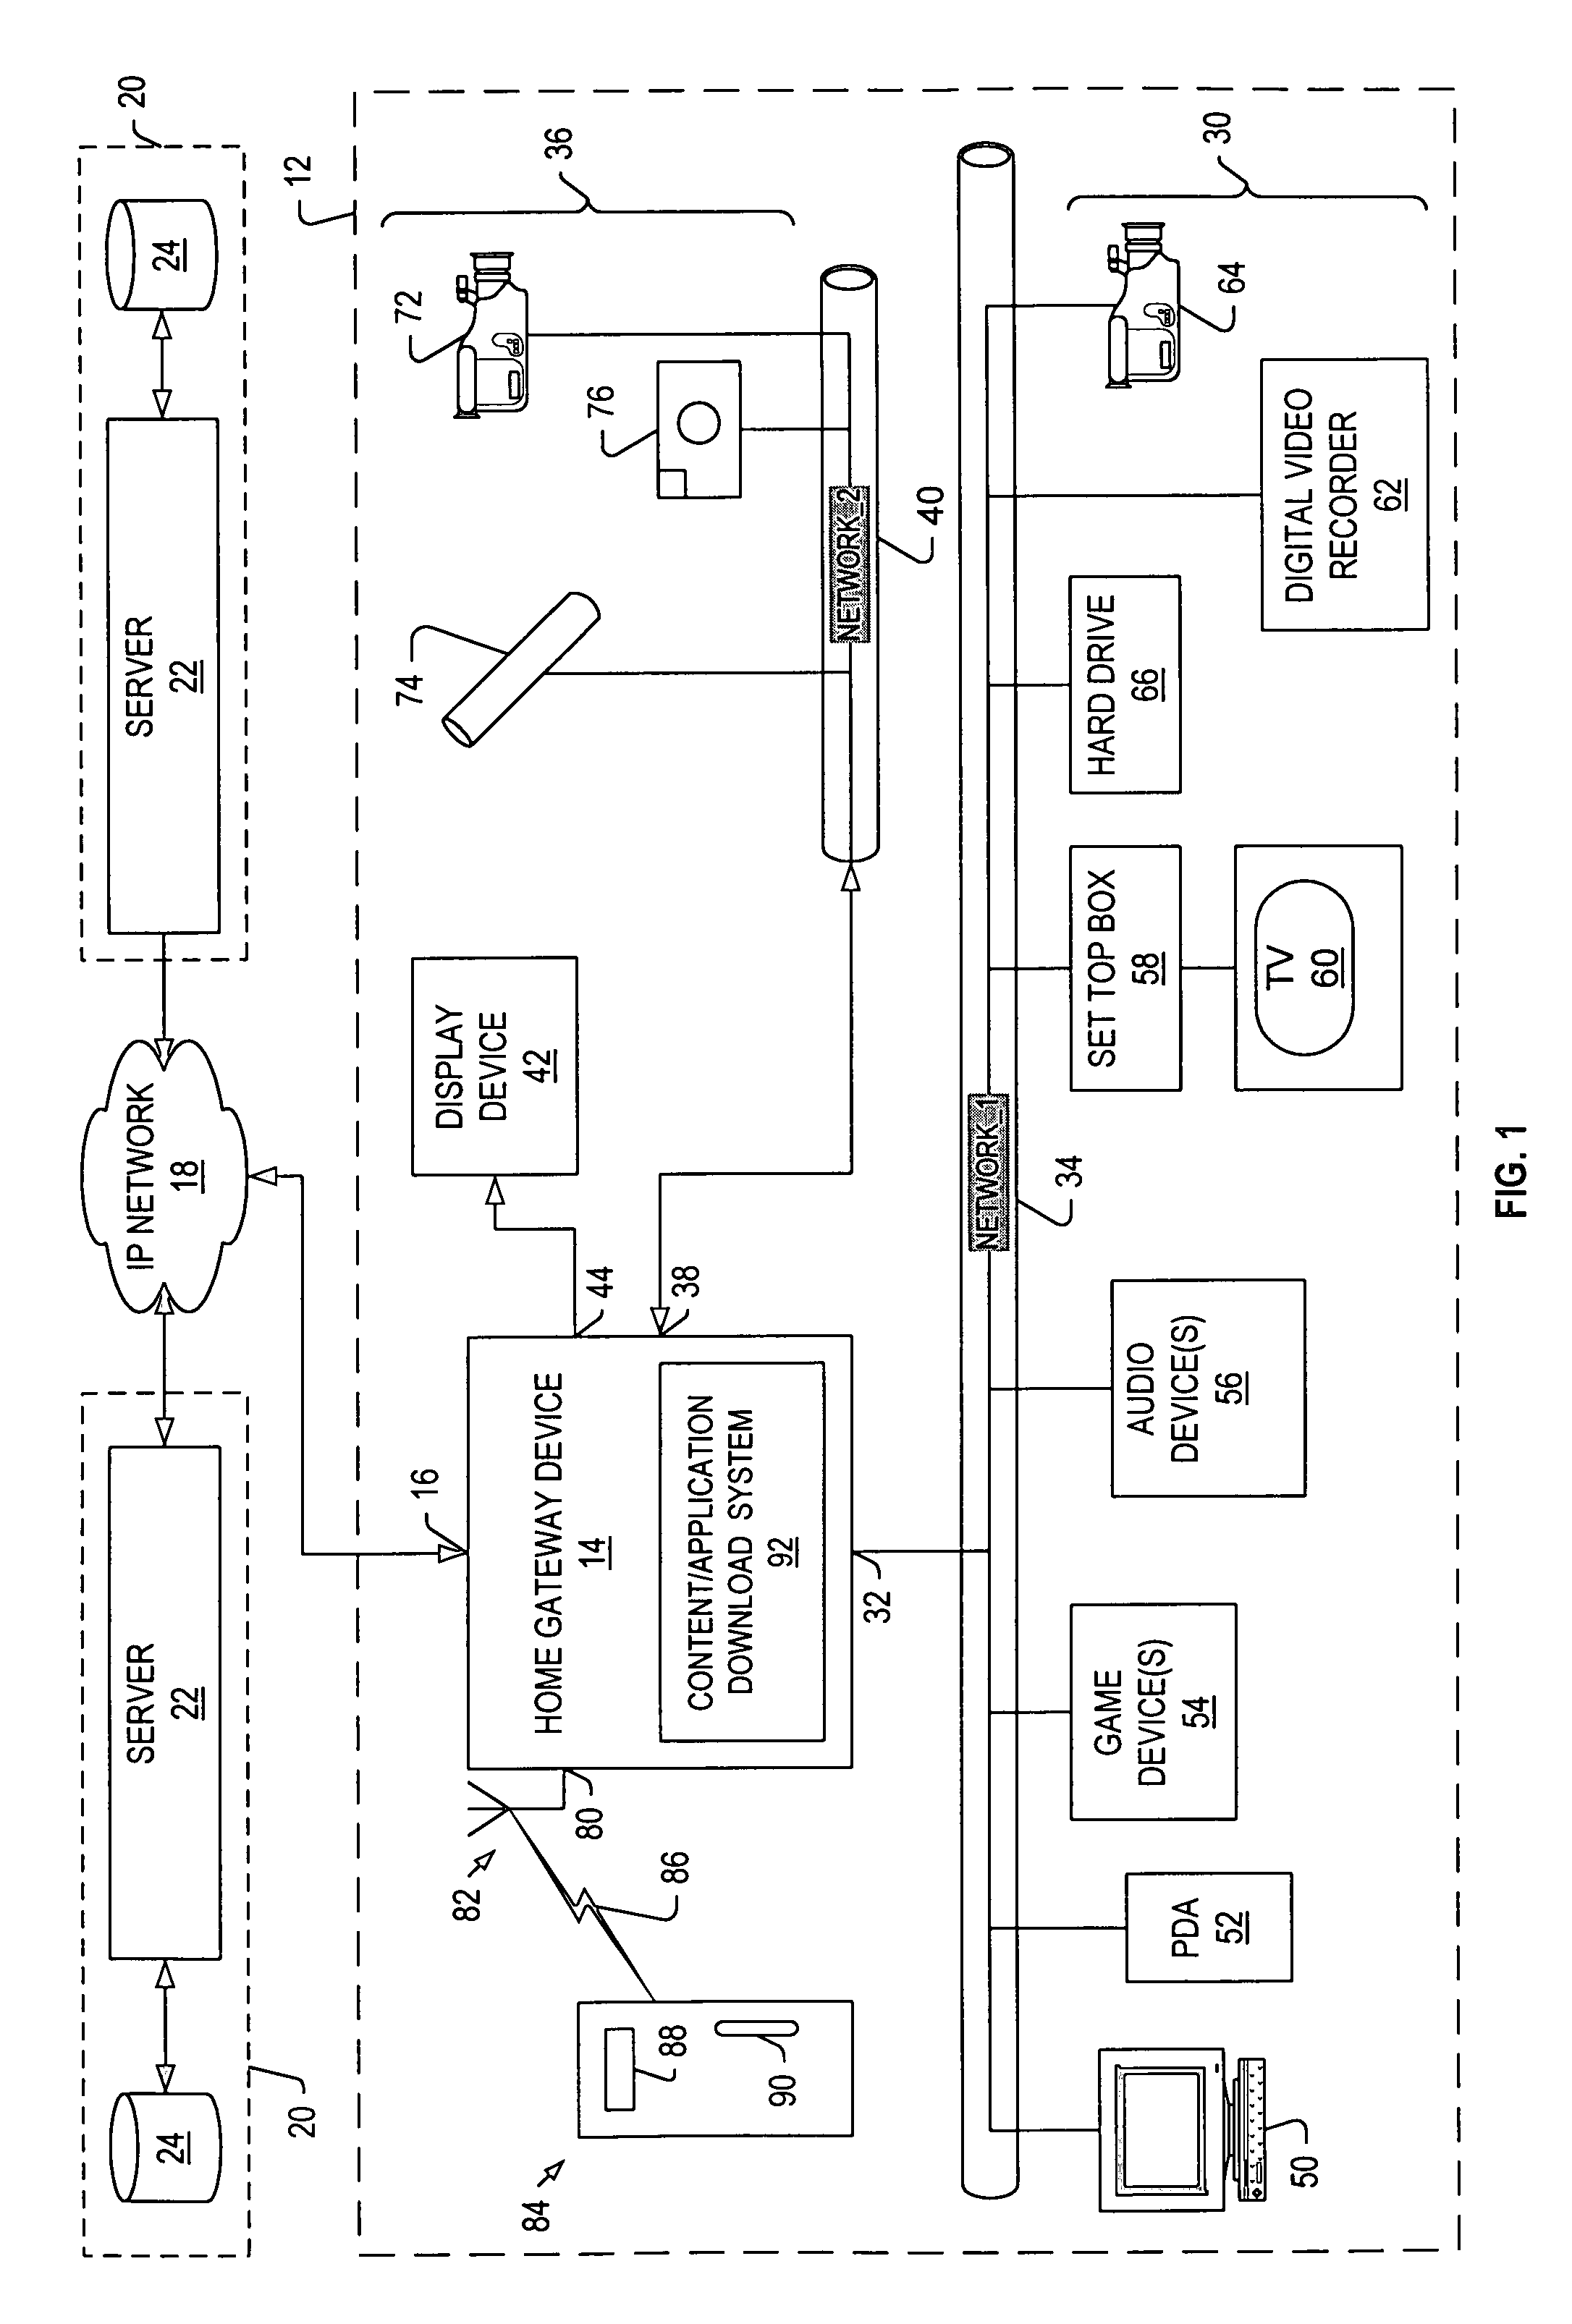 Remote manual, maintenance, and diagnostic services for networked electronic devices